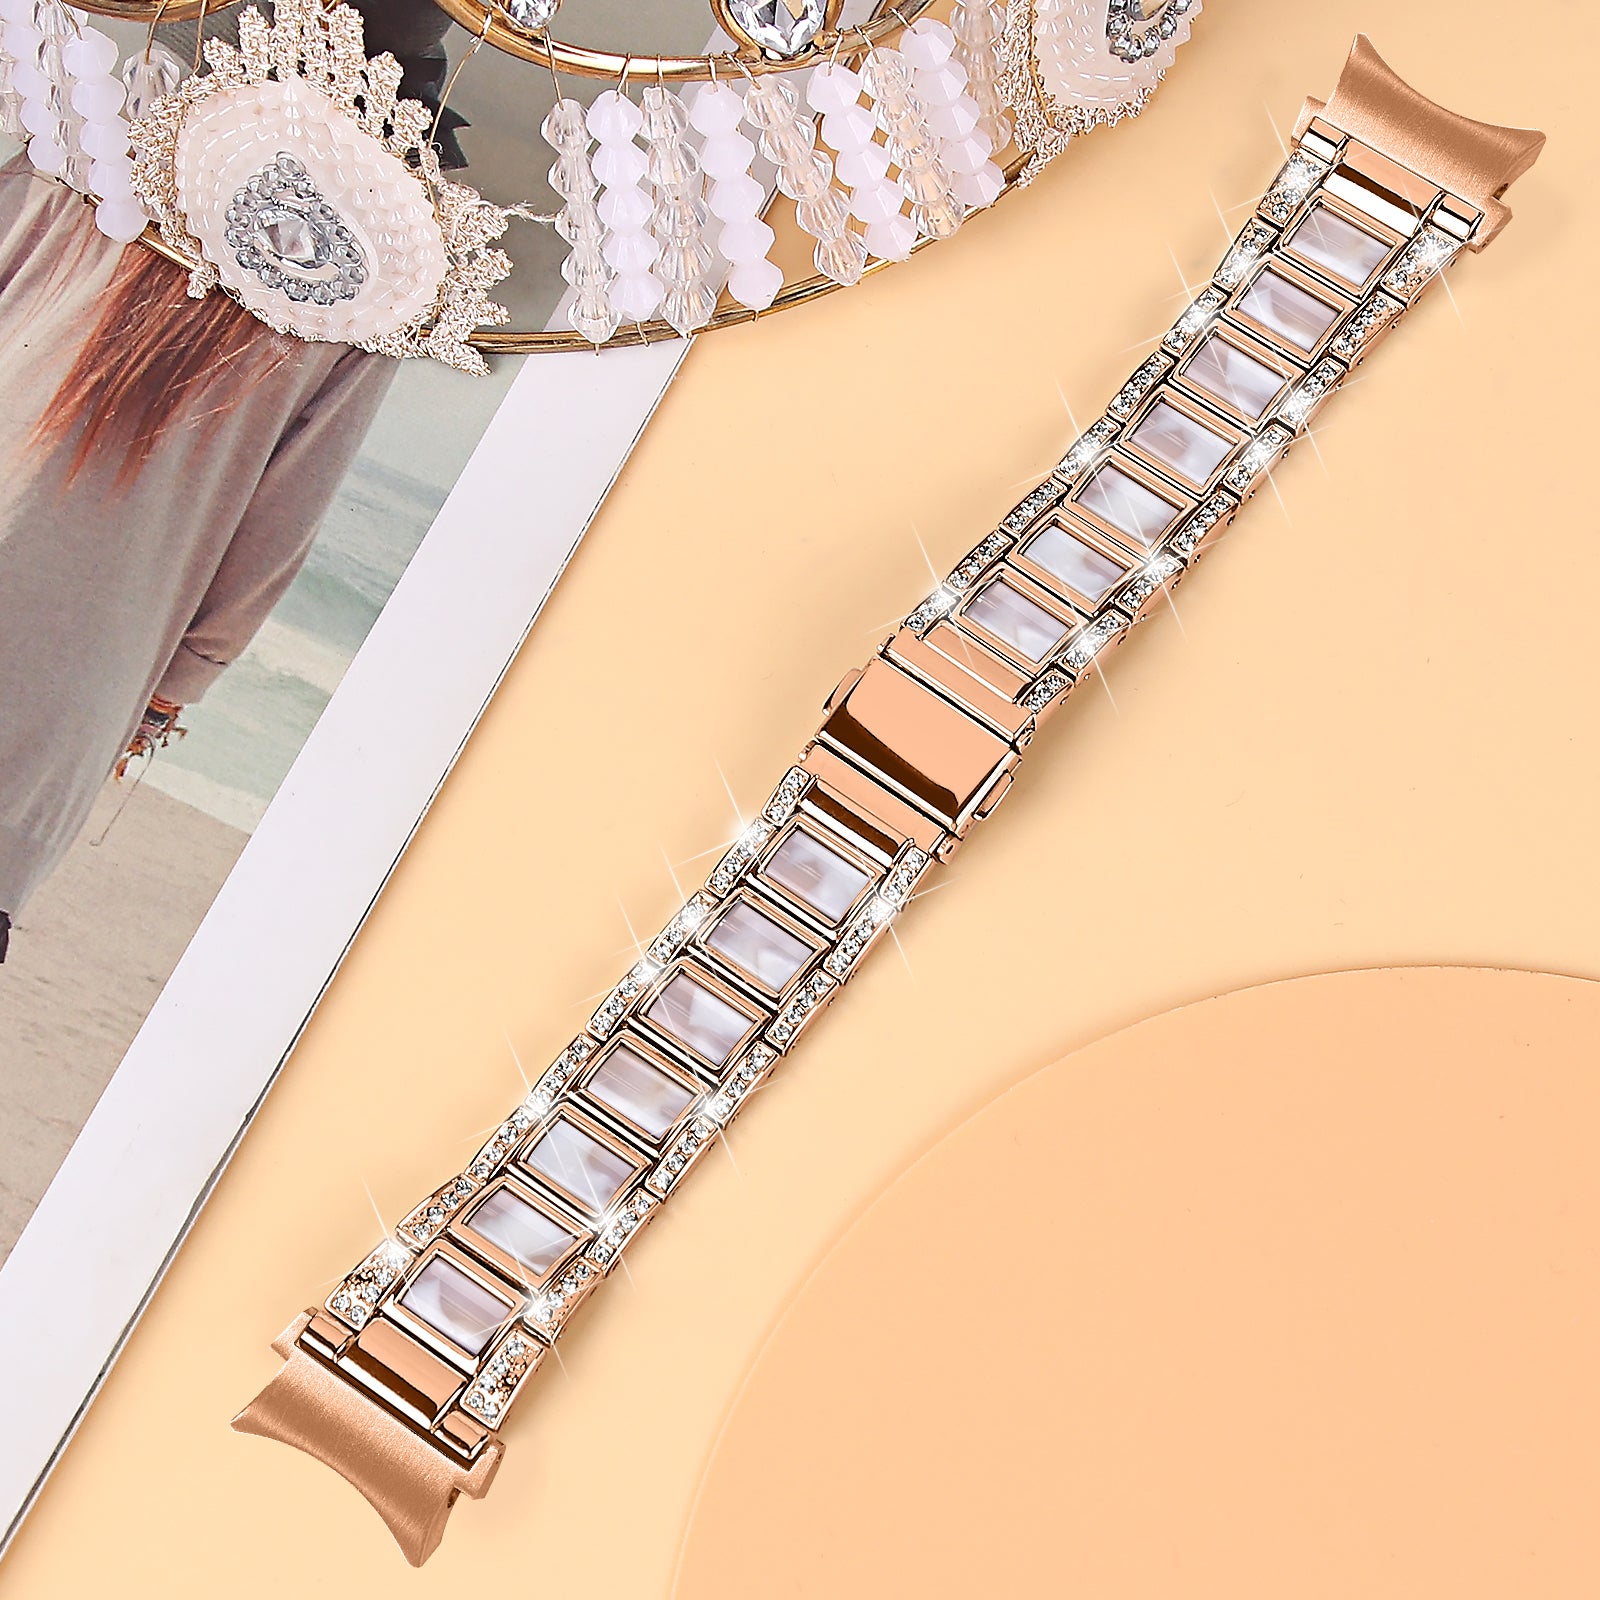 for Samsung Galaxy Watch4 Active 40mm/44mm/Watch4 Classic 42mm/46mm Rhinestone Decor Stainless Steel Resin Watch Band with Watch Strap Adapter - Rose Gold/Pink Mix